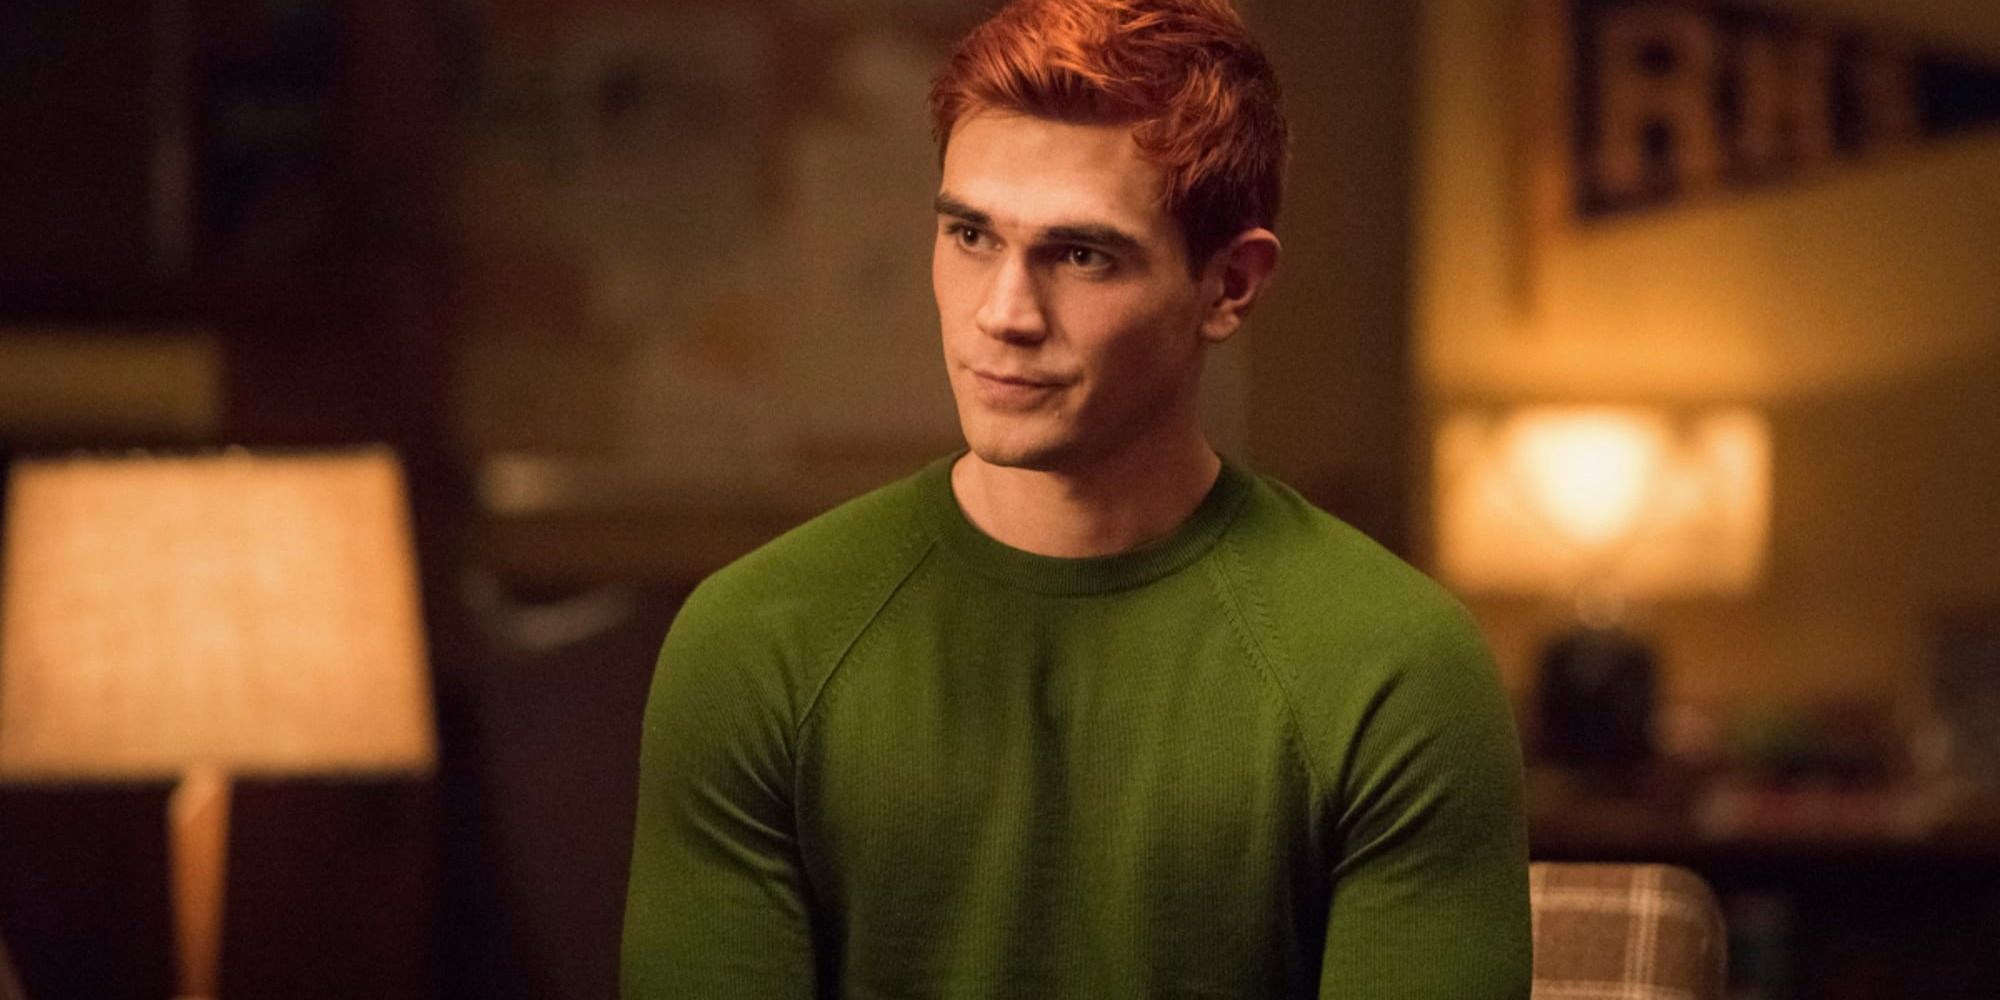 Archie looks on while wearing a green sweater in Riverdale.